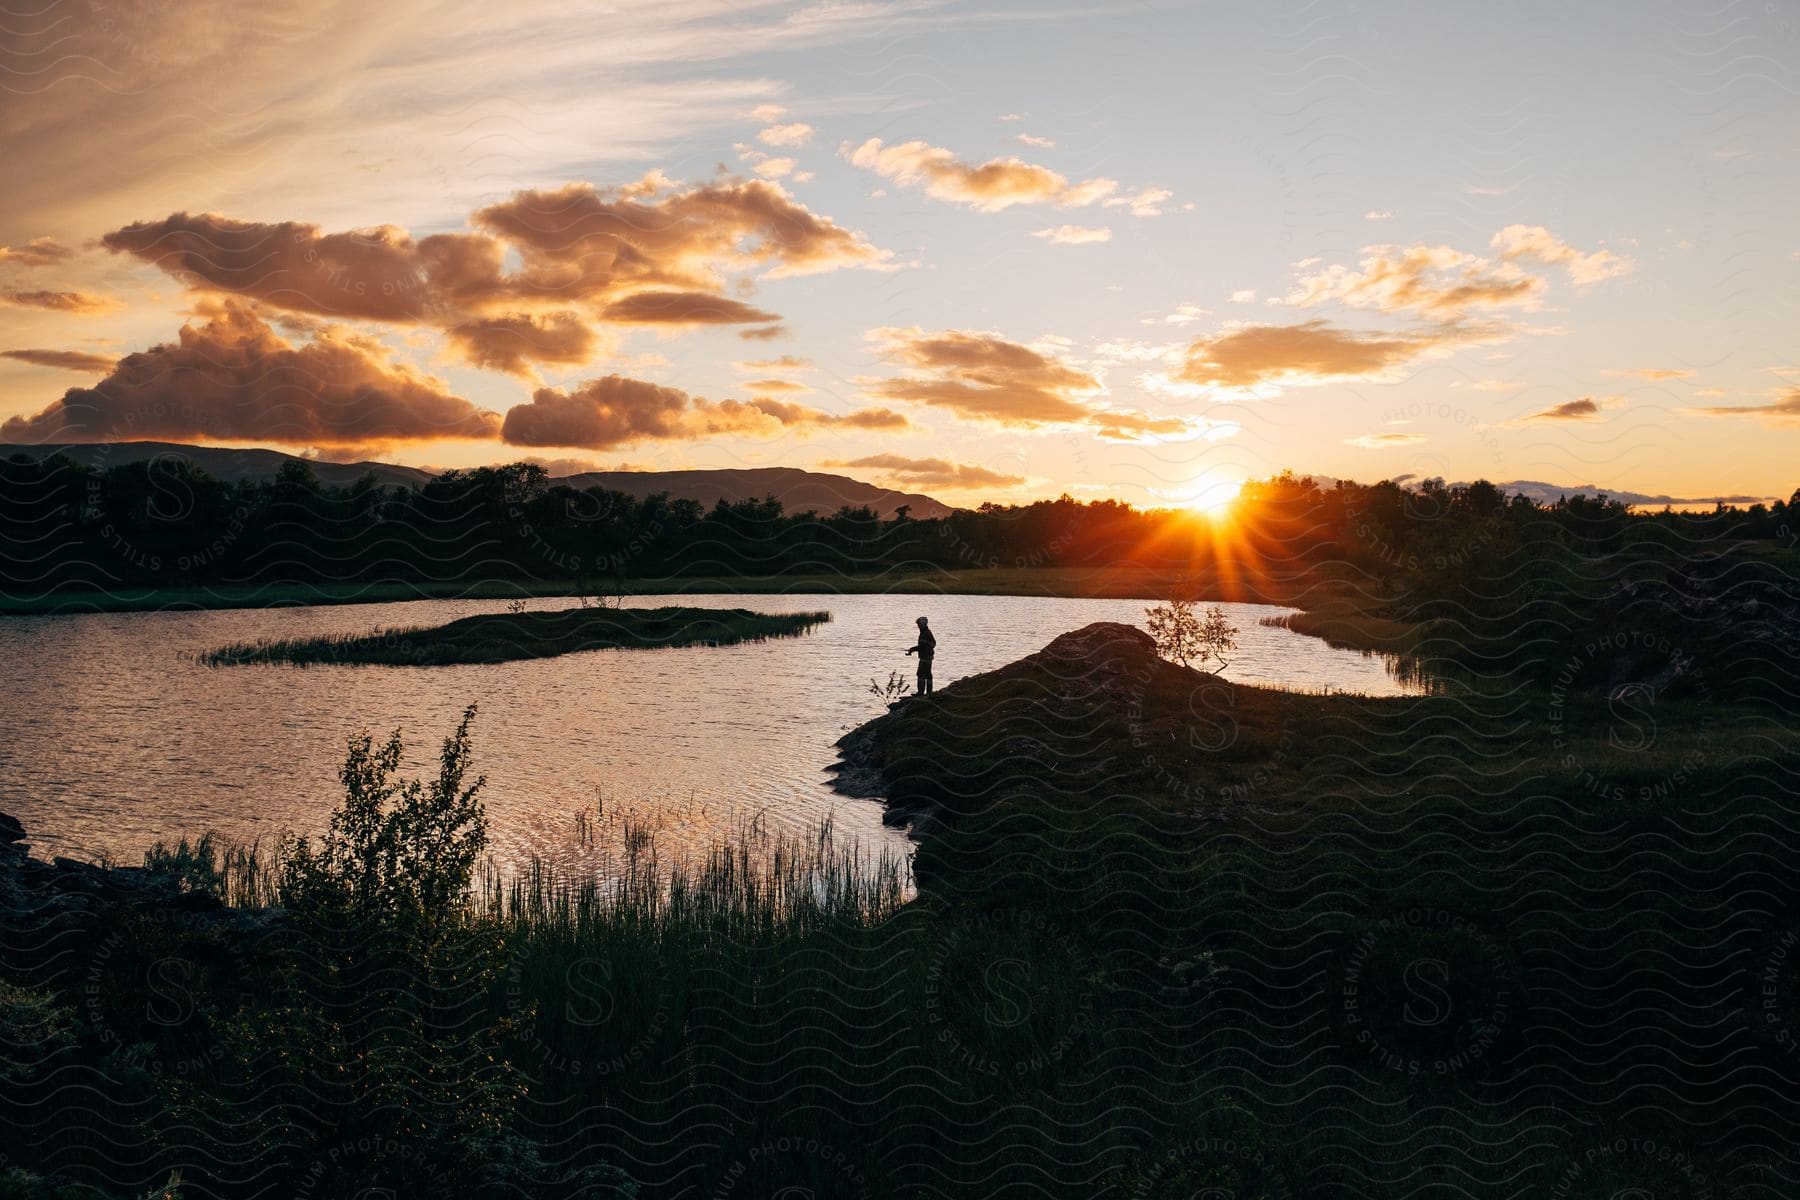 A man fishing on a riverbank at sunset surrounded by lush vegetation